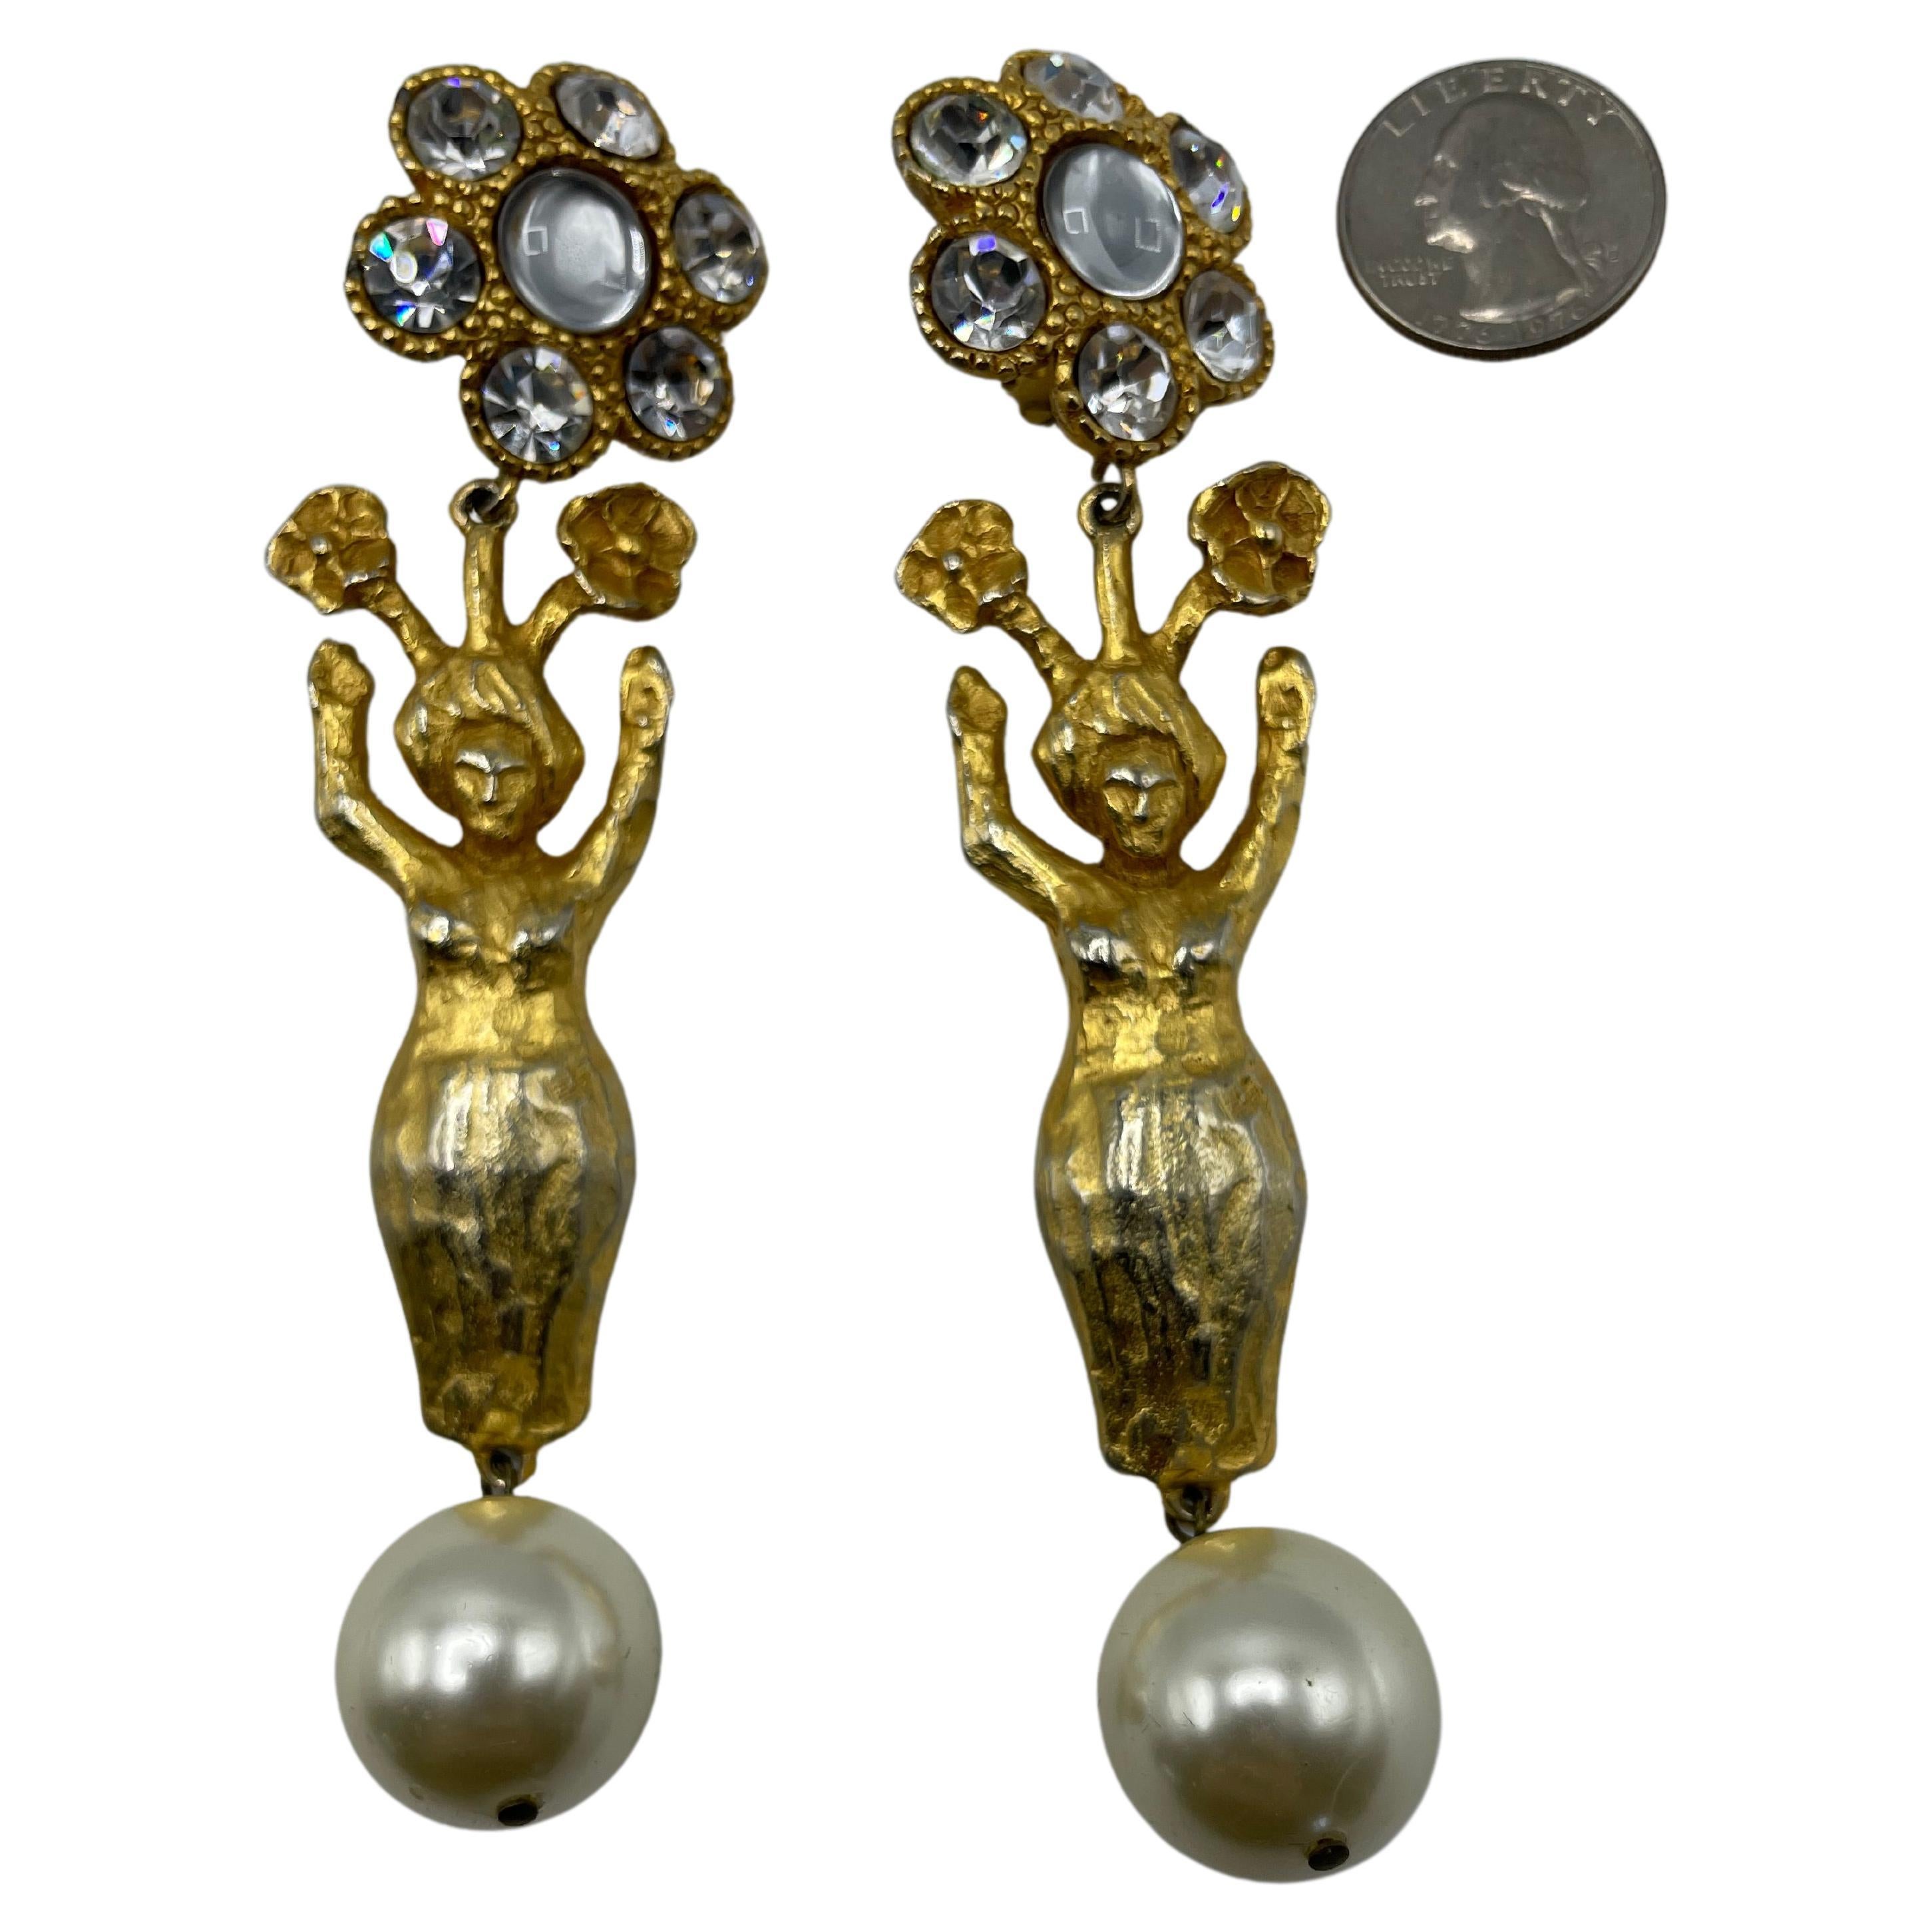 Christian Lacroix Gold-Toned Drop Earrings Pearl Rhinestone. In good condition. With the Christian Lacroix stamp in the back. Made in France.
Length = 14 cm 
Width = 3 cm 